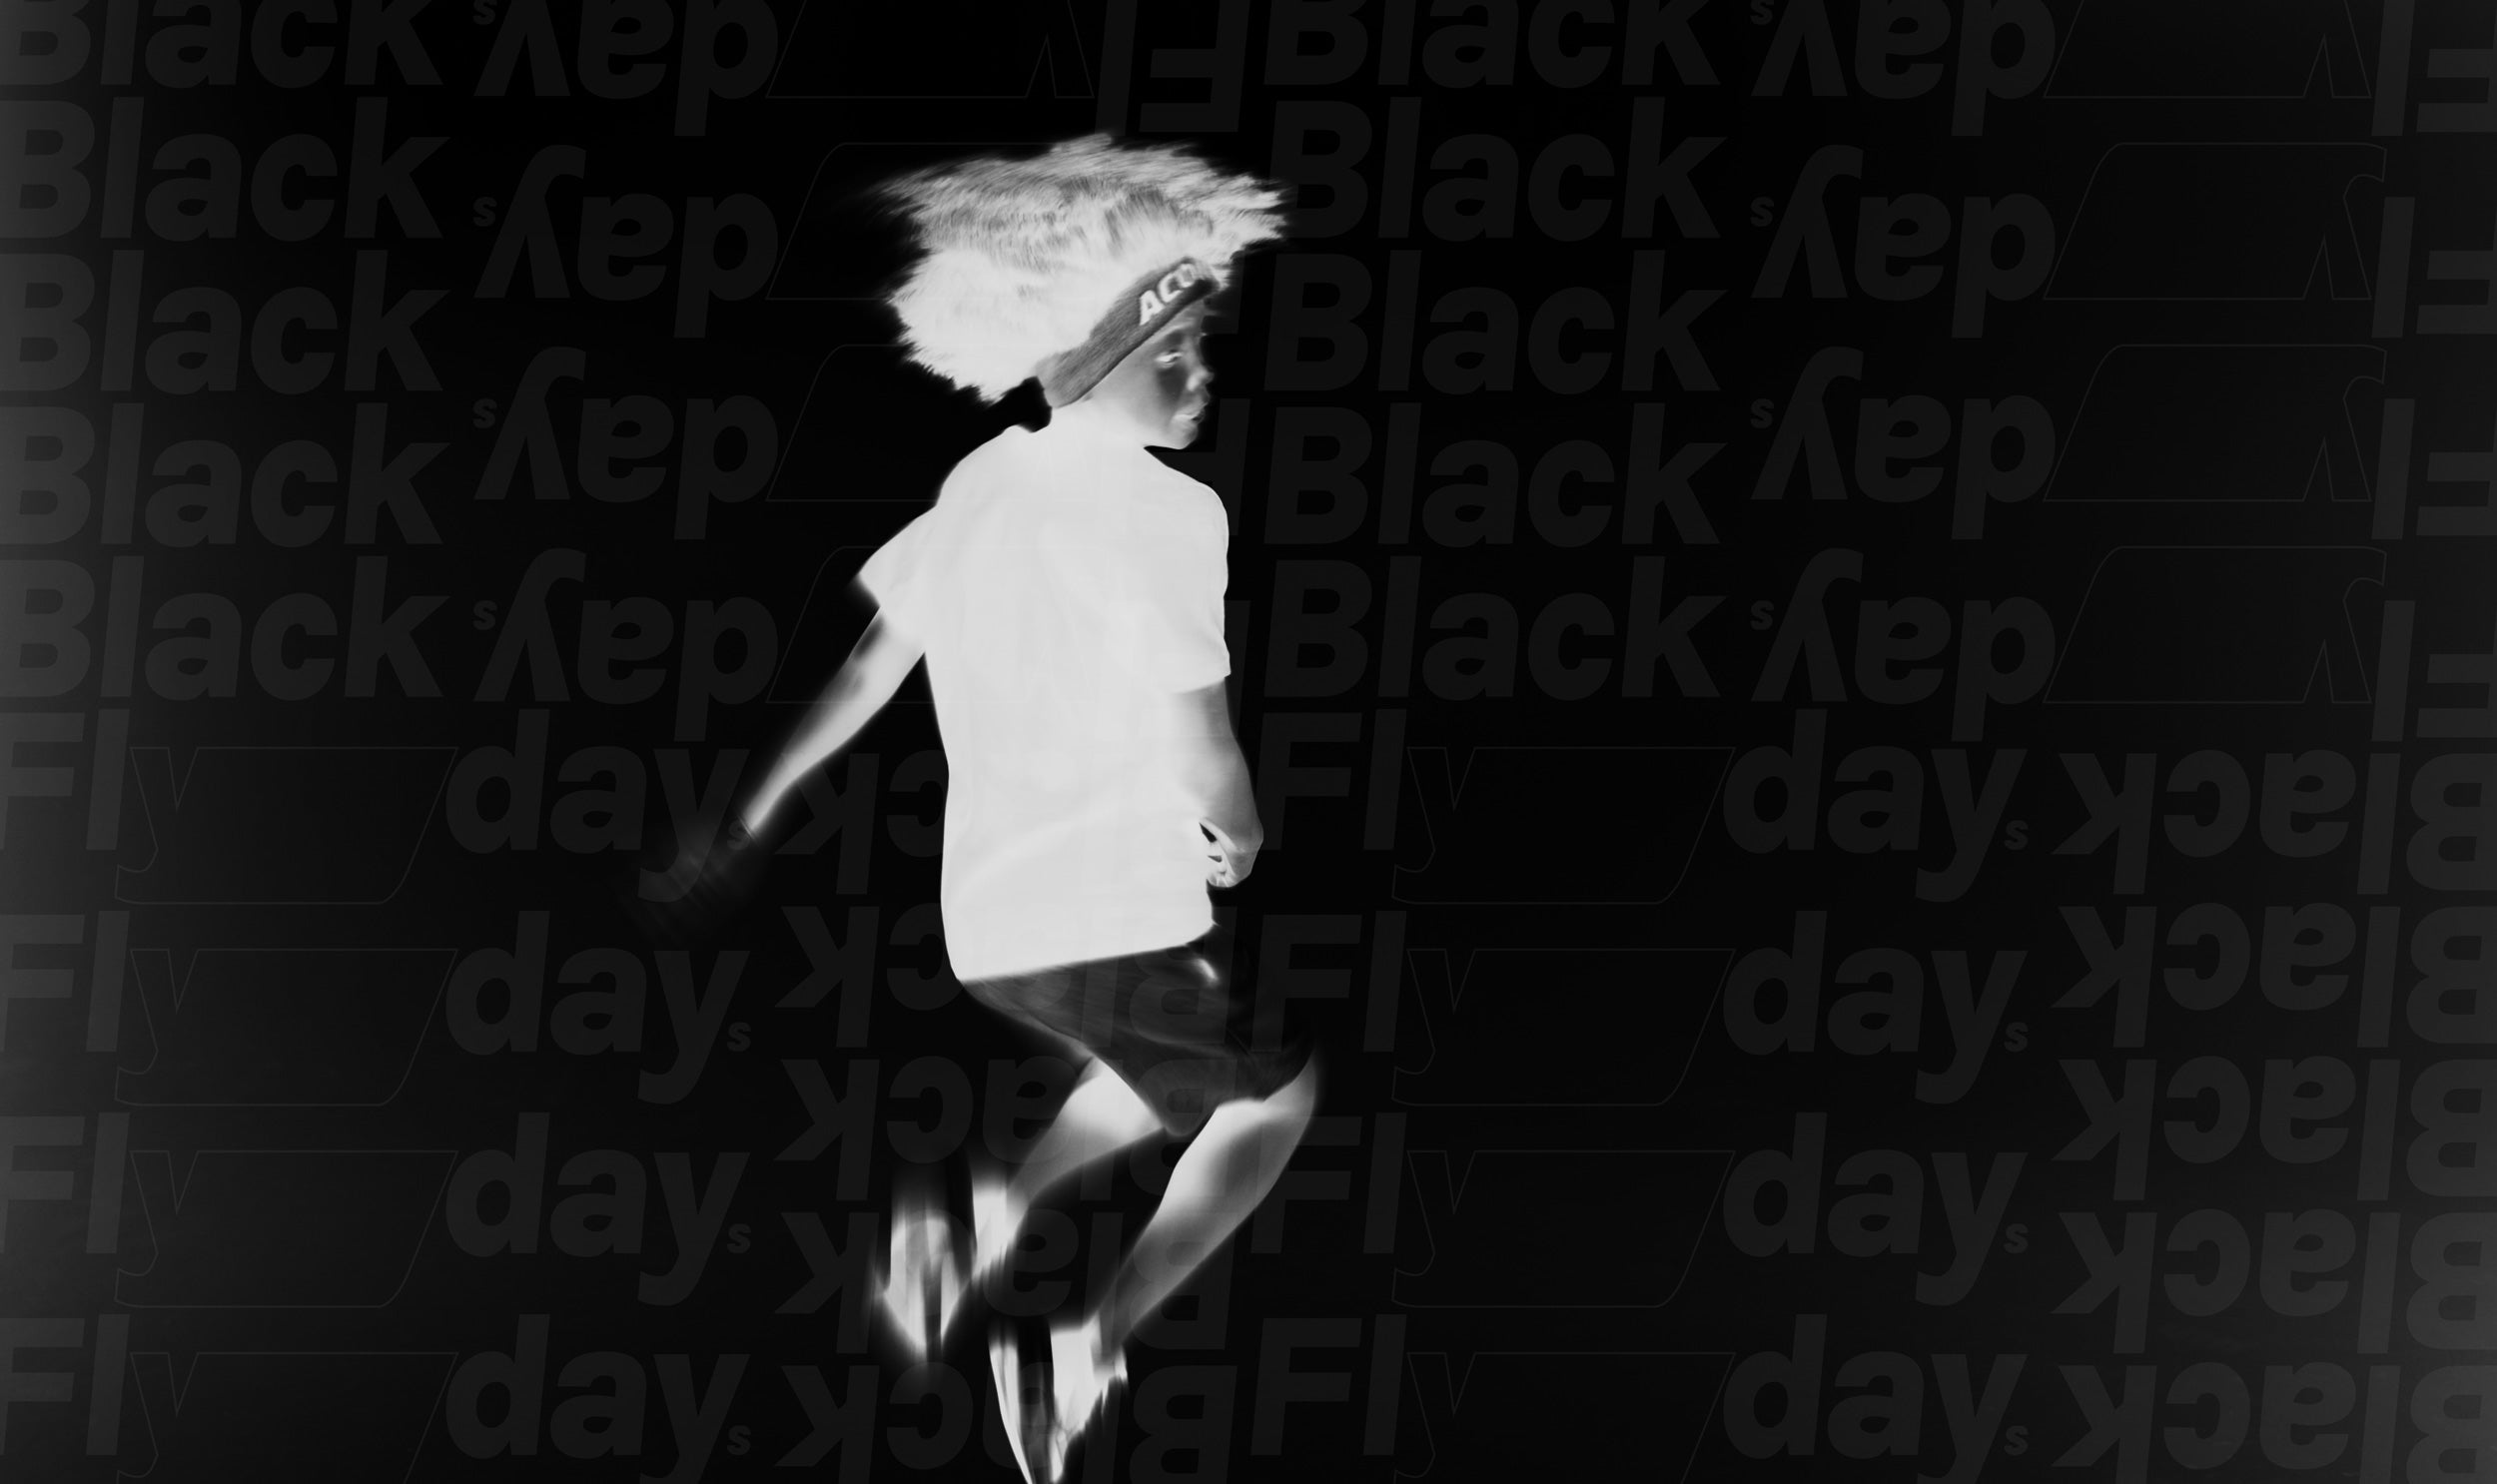 Black and white negative picture of a boy jumping.